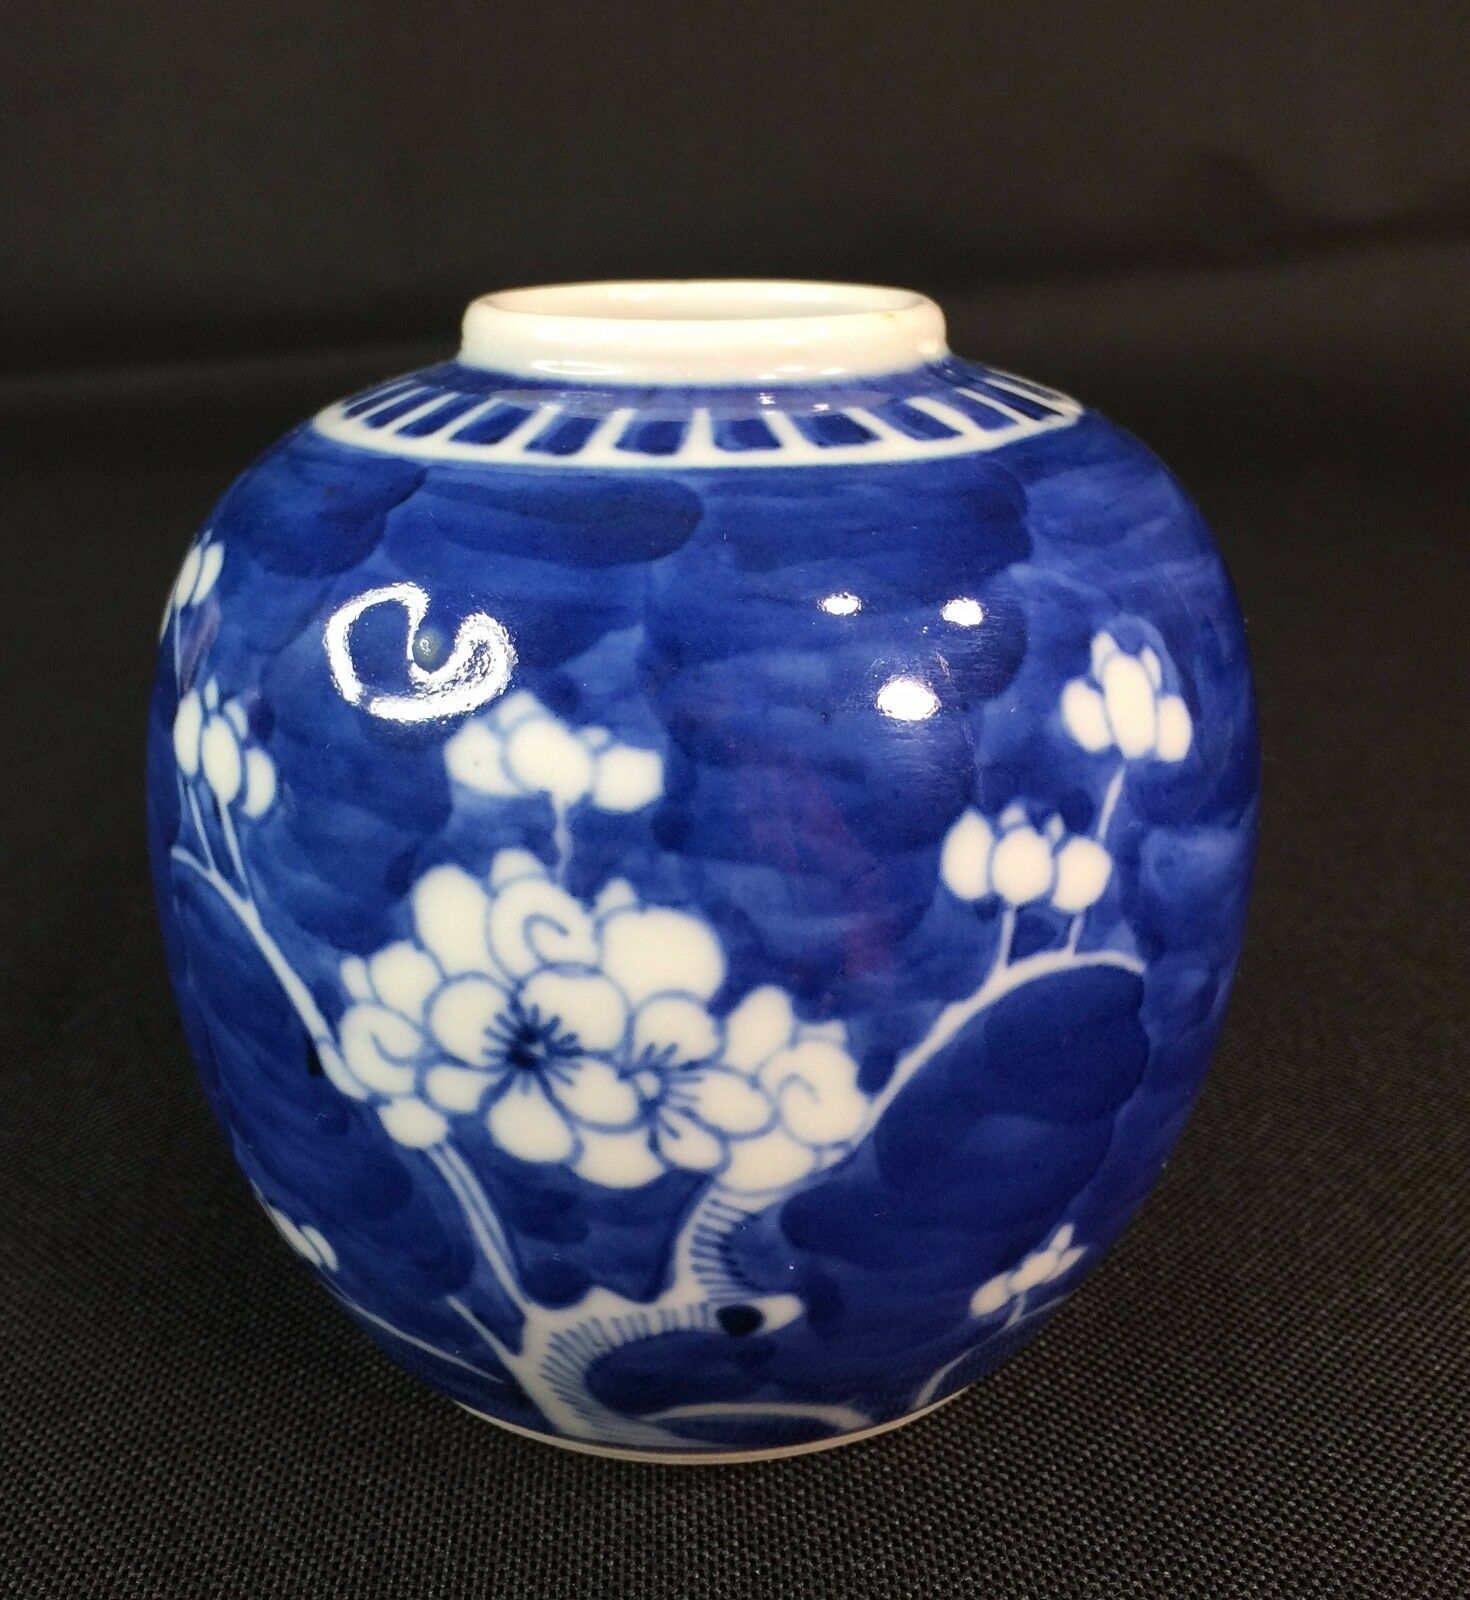 Antique Chinese Porcelain Blue And White Prunus Cracked Ice Hawthorn Ginger Jar